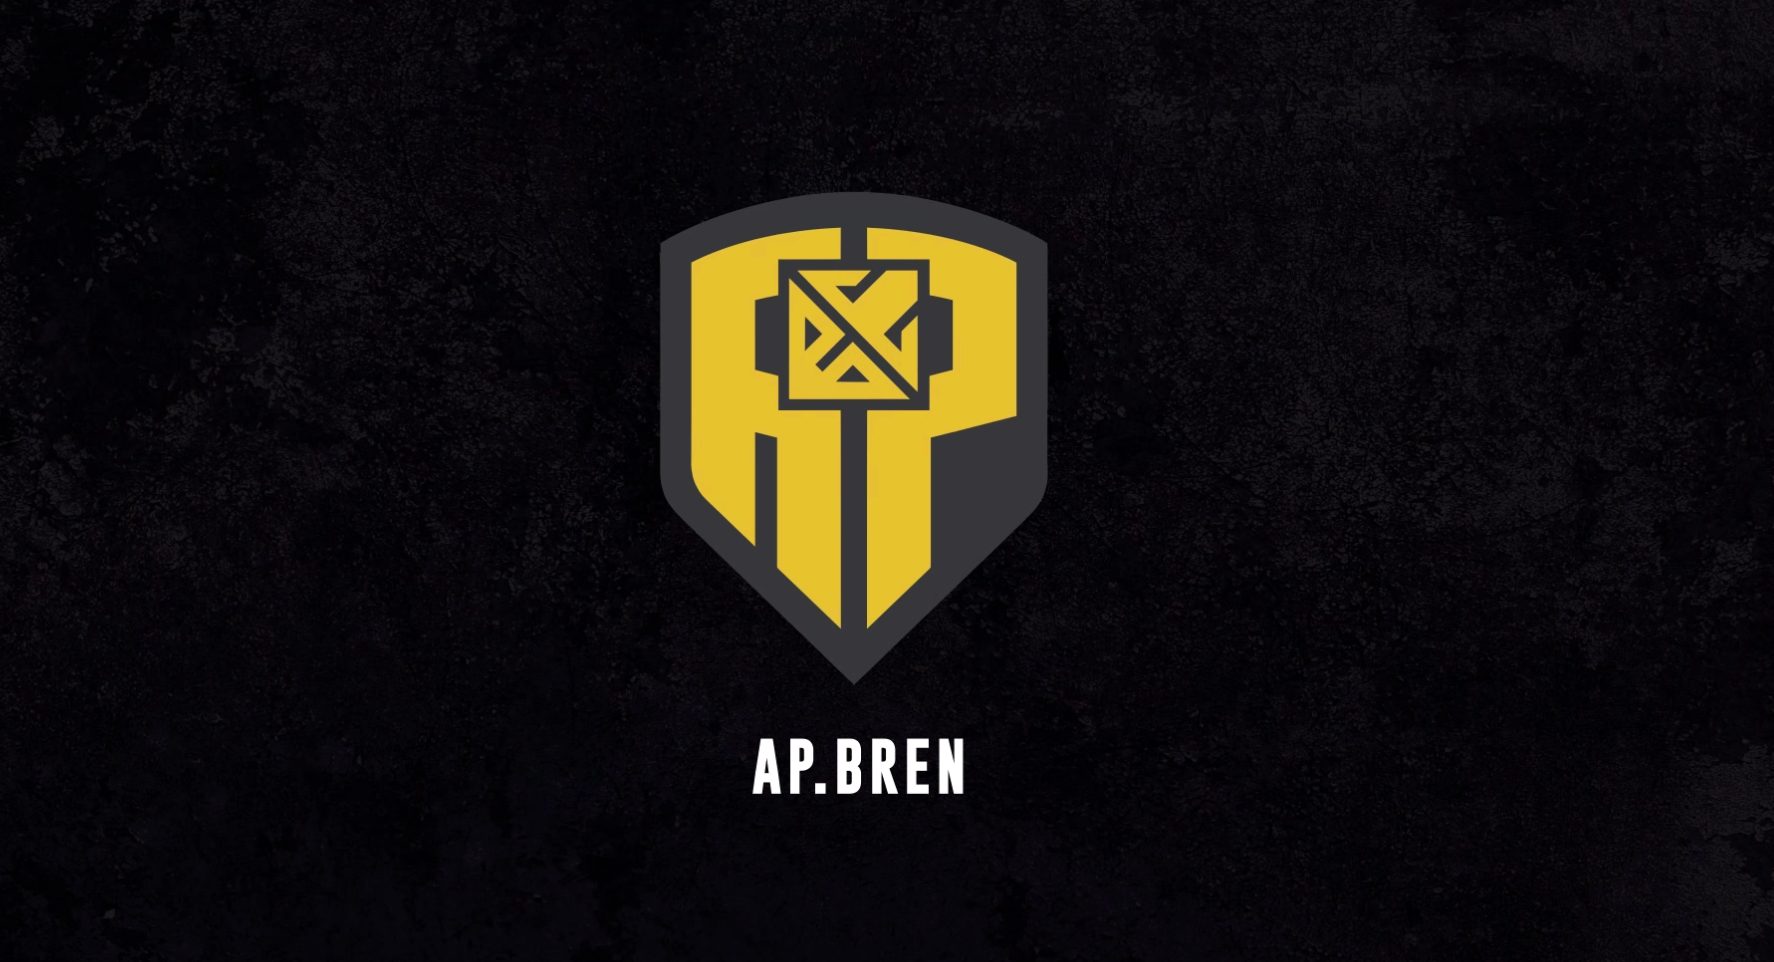 AP Bren aims to scout, develop more Filipino esports players